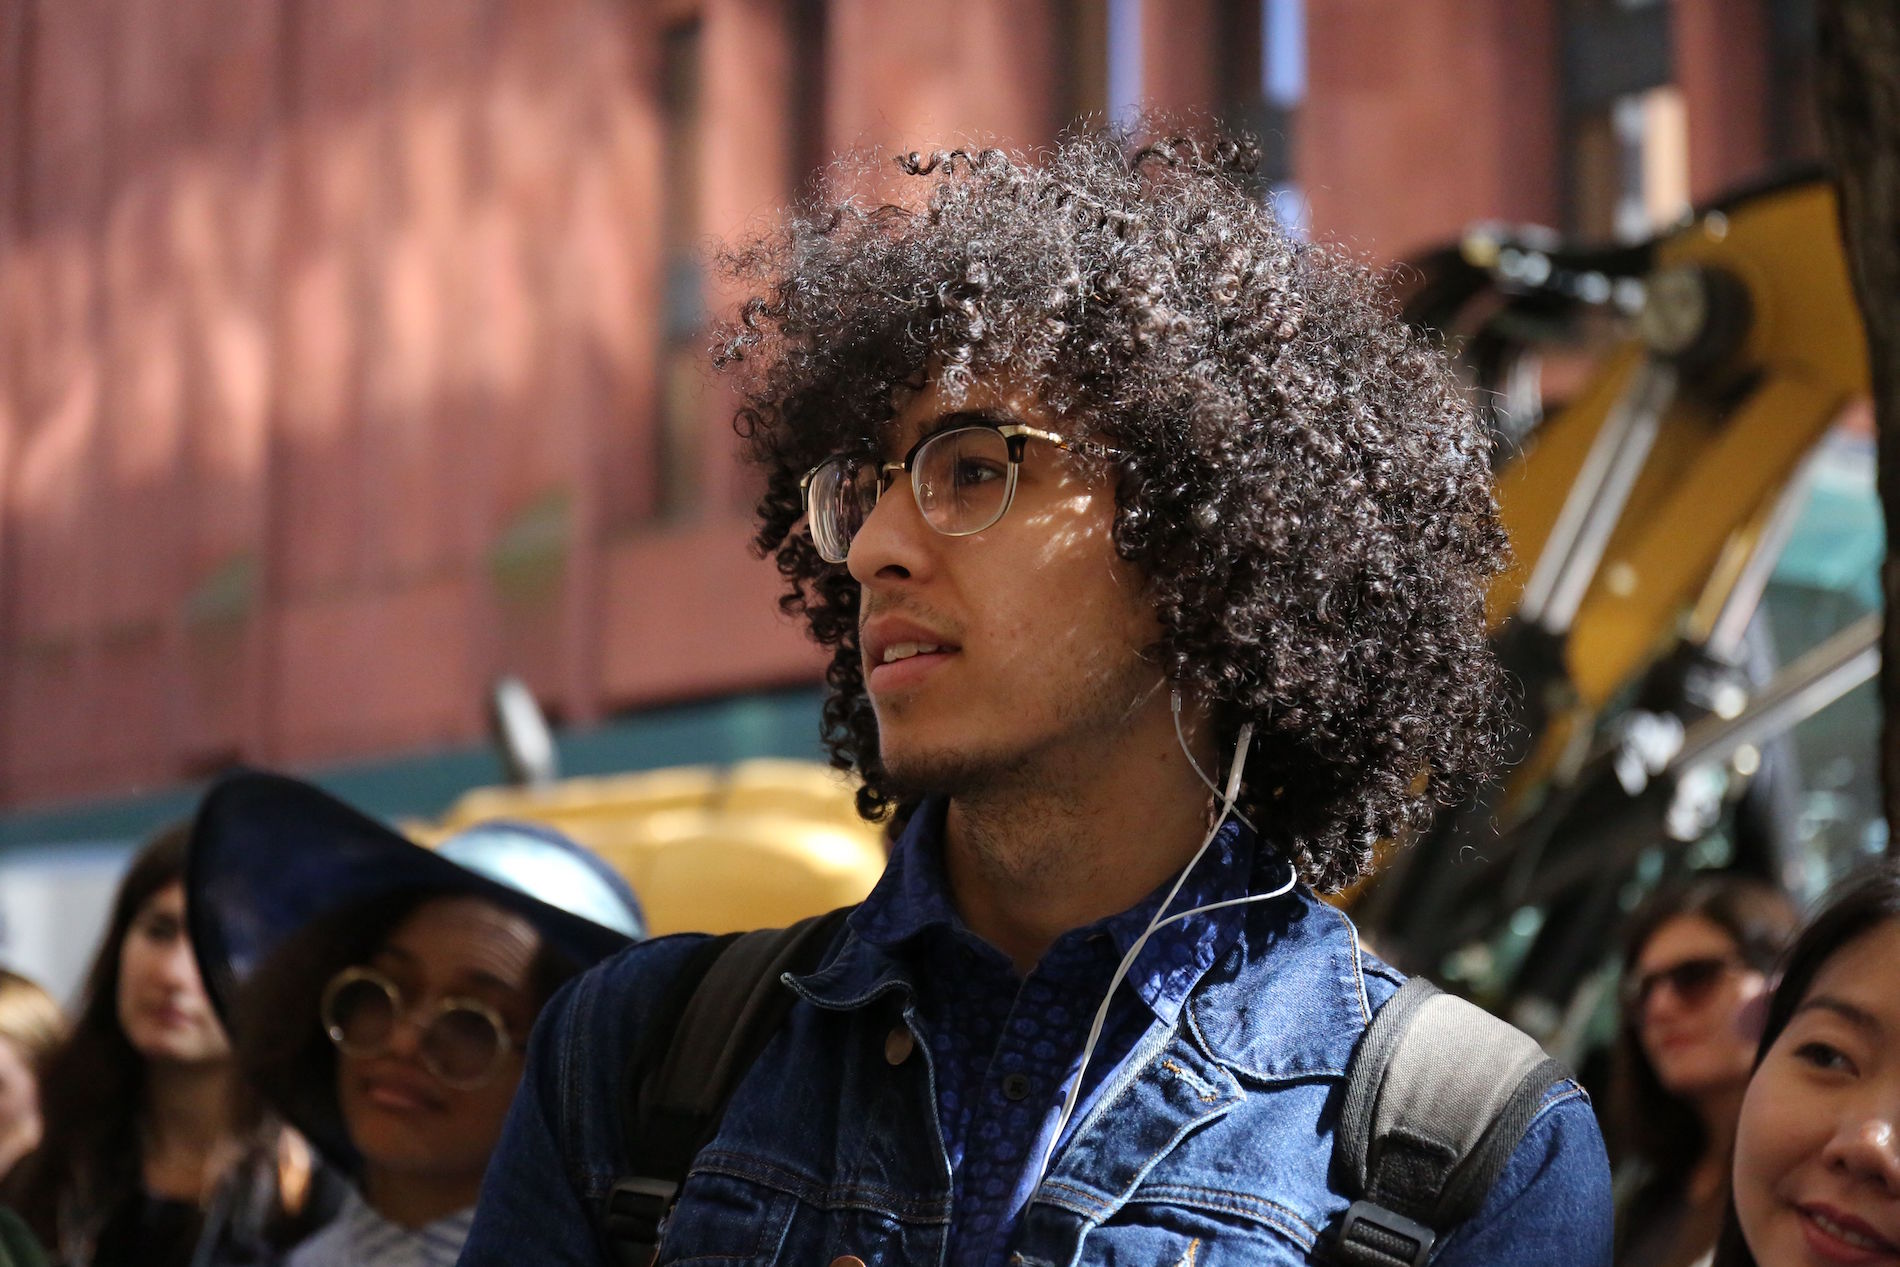 Man with curly brown hair and glasses watches the poetry reading